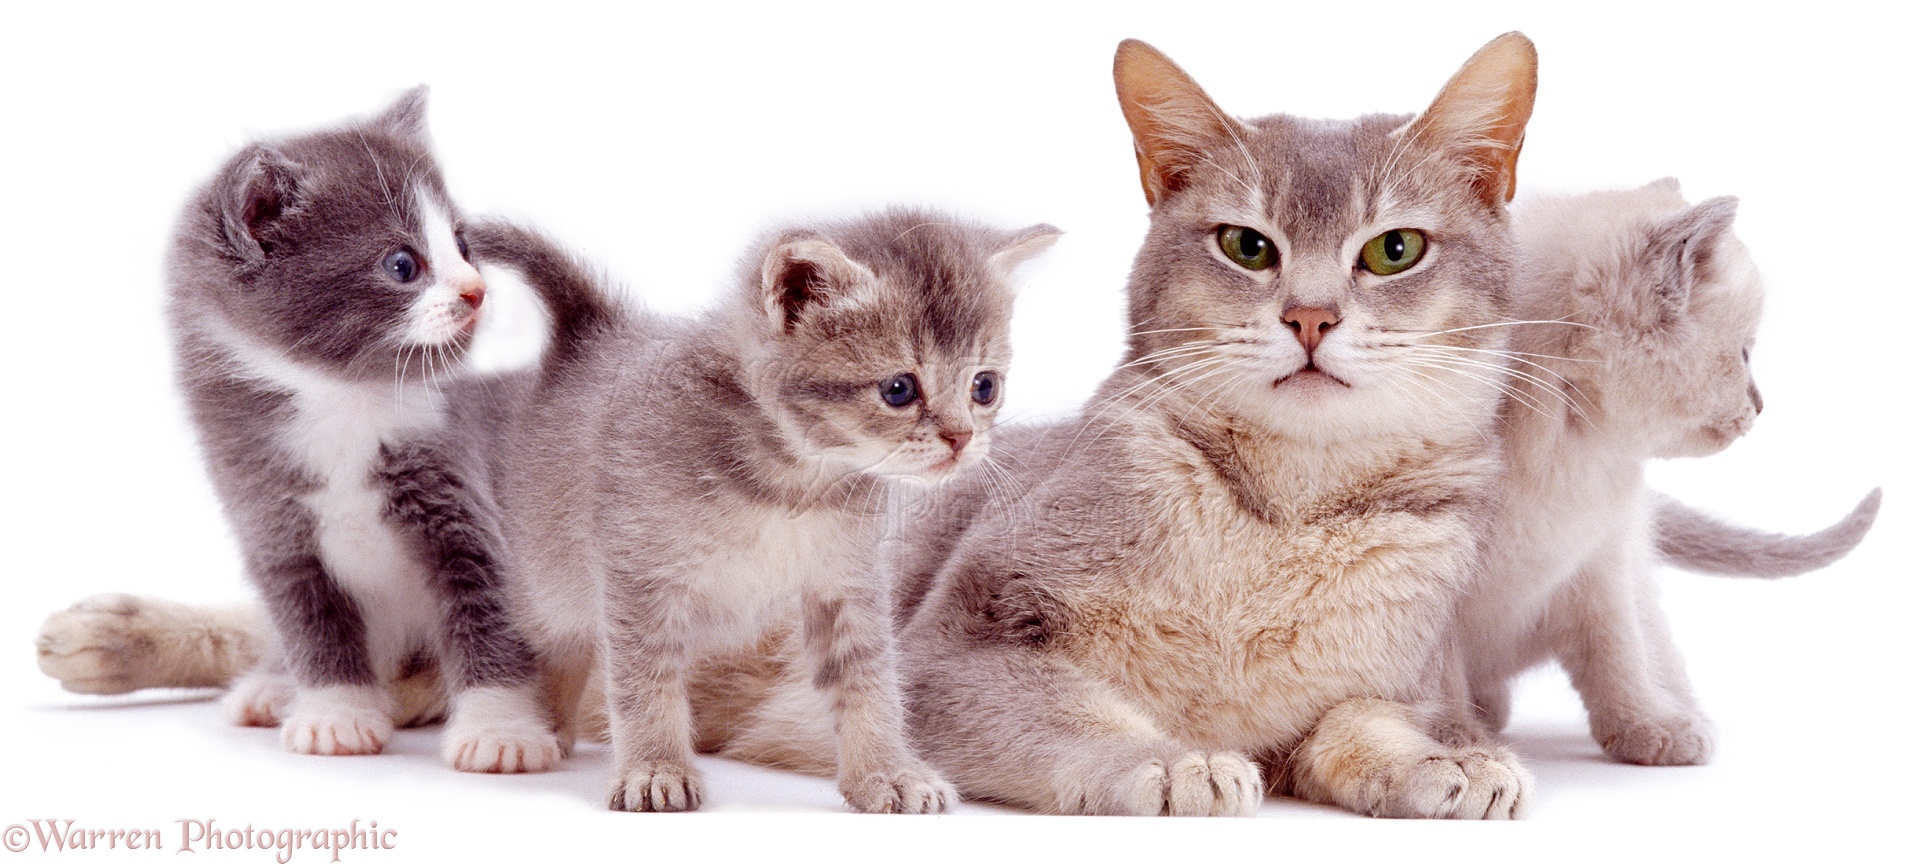 Grey mother cat and kittens photo WP00343